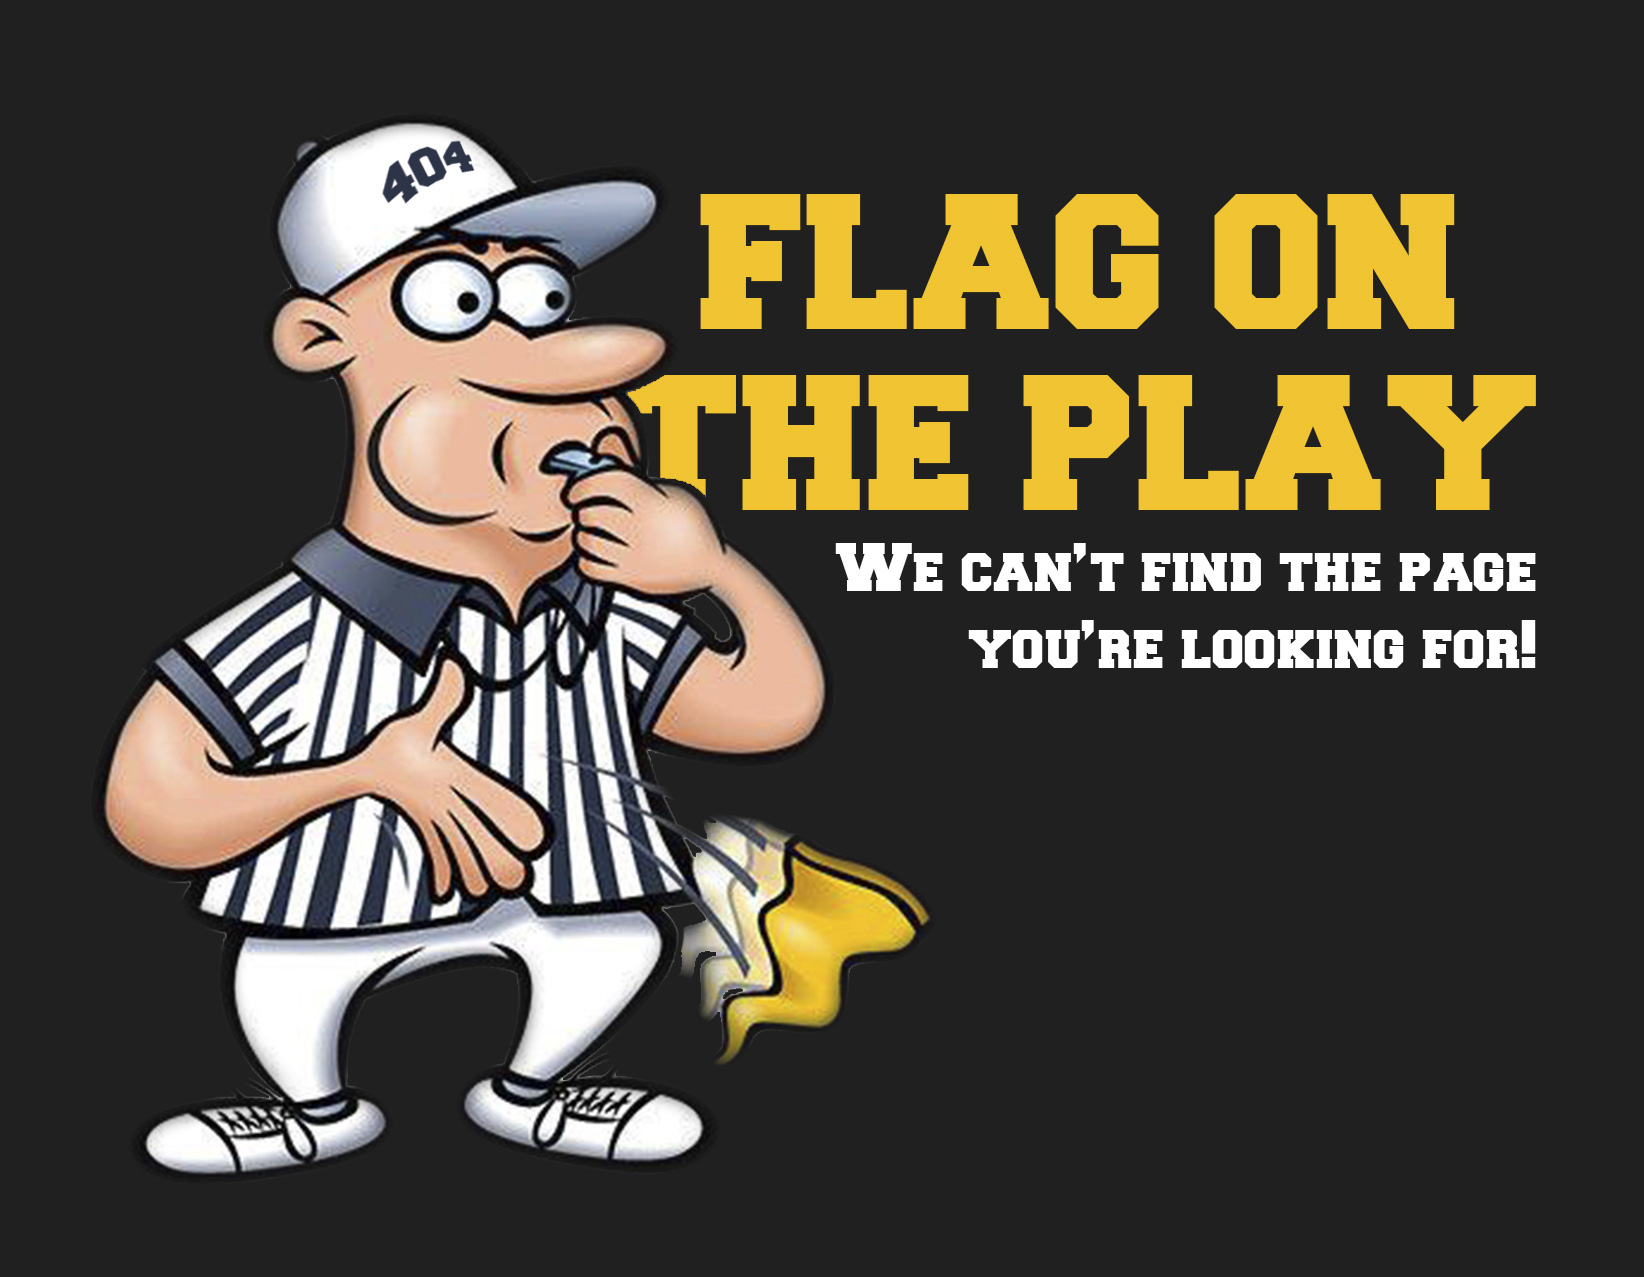 Flag on the play! We can't find the page you're looking for!